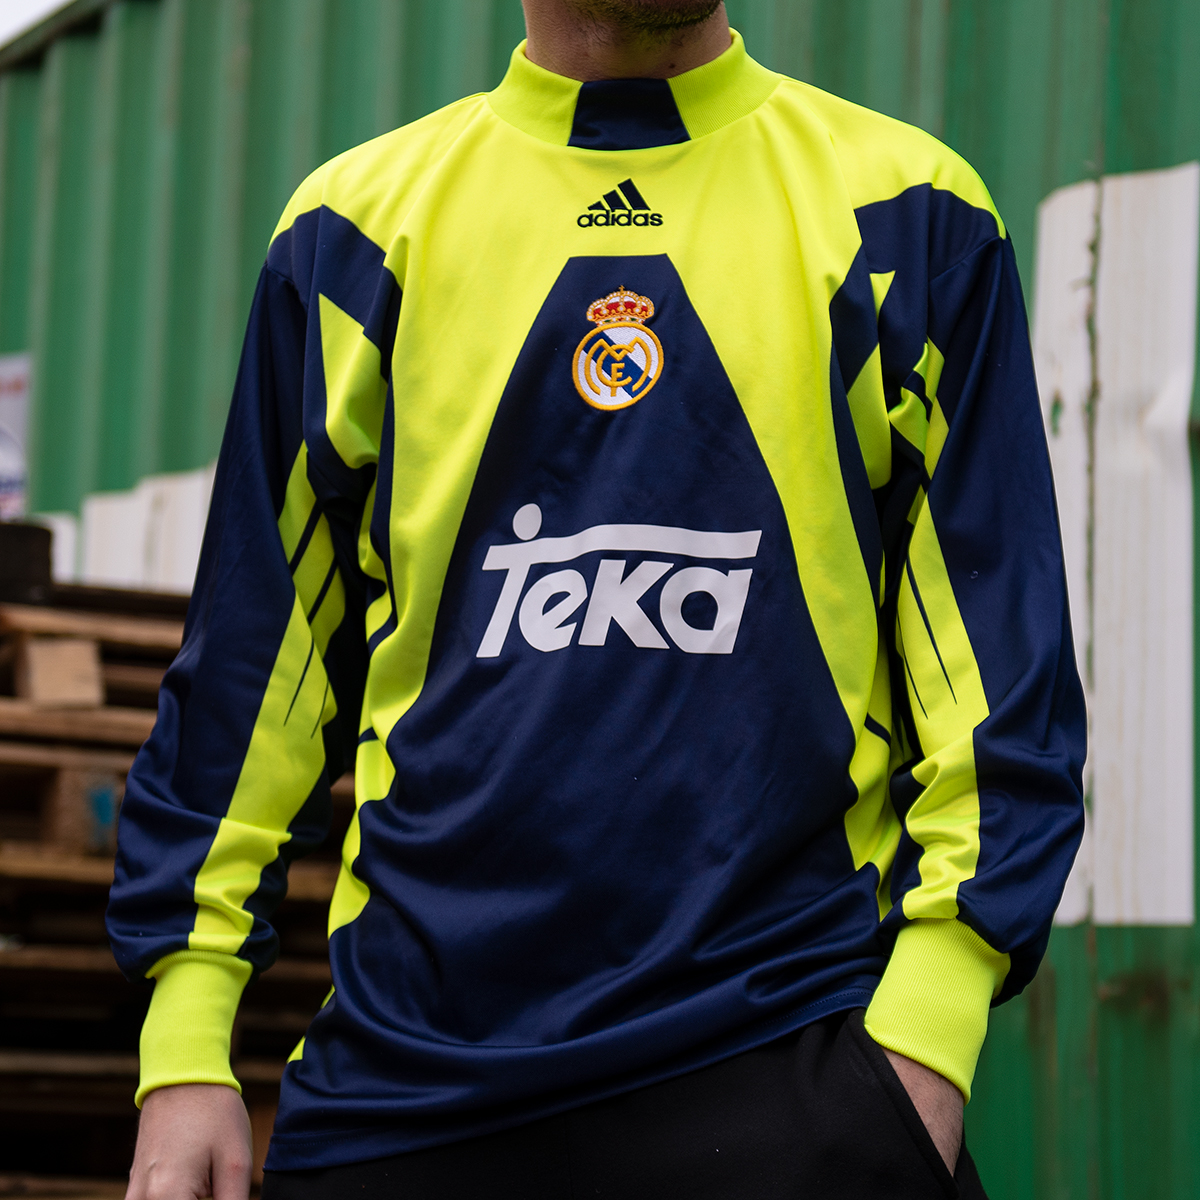 Schedule violence telescope Classic Football Shirts on Twitter: "Real Madrid 1999 Goalkeeper by Adidas  🇪🇸 Worn during Iker Casillas' debut season! Hitting the site this week 👀  https://t.co/u3TXkJov6S" / Twitter